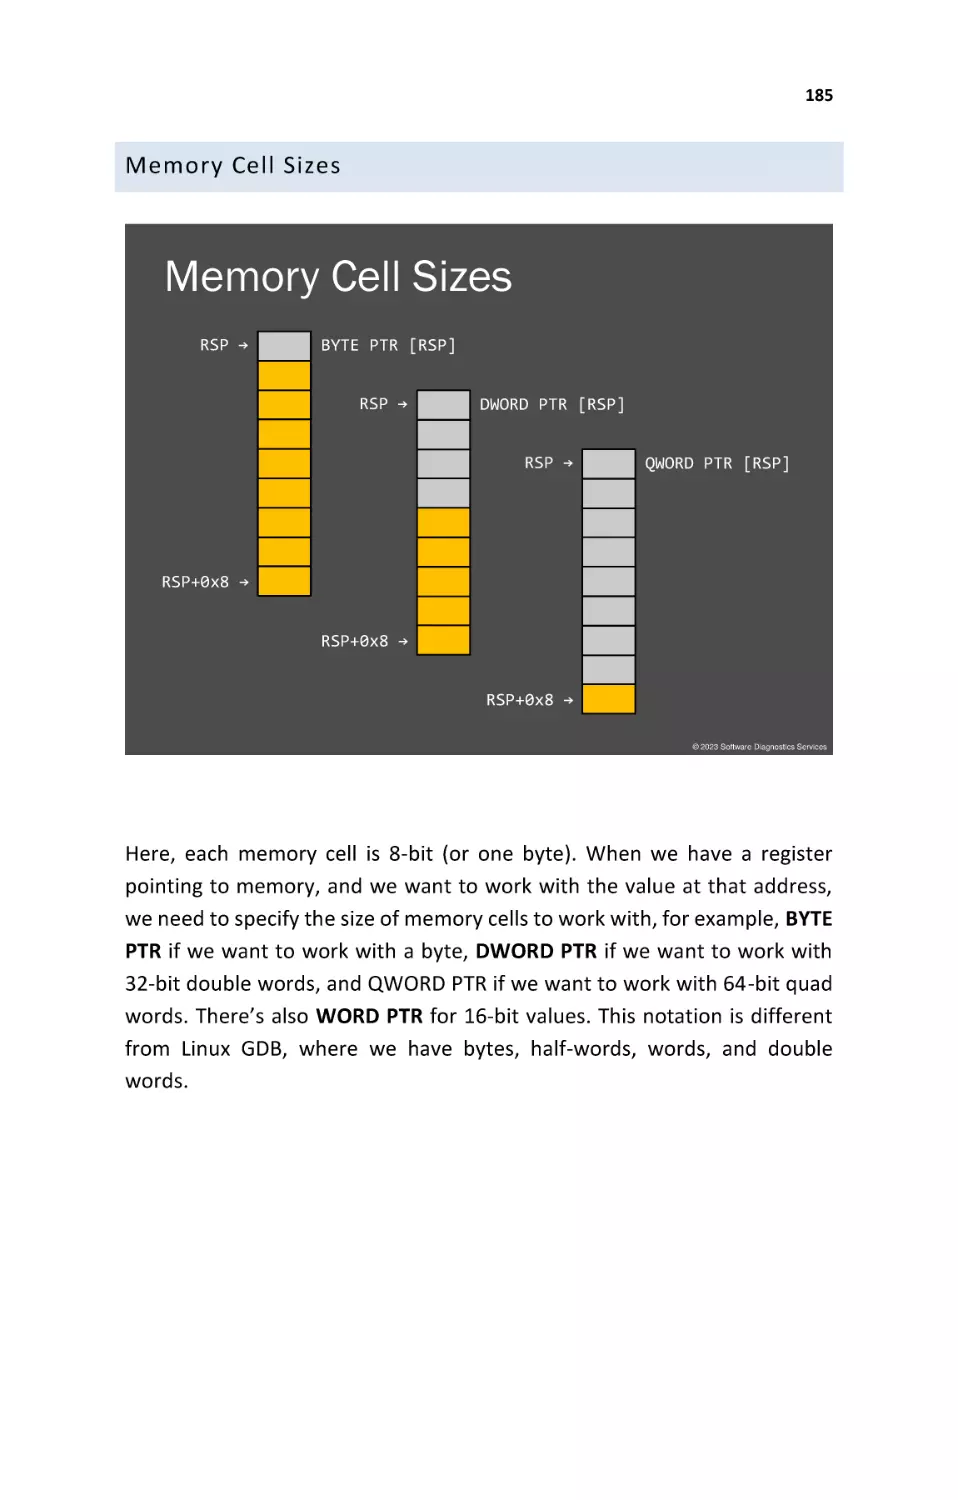 Memory Cell Sizes